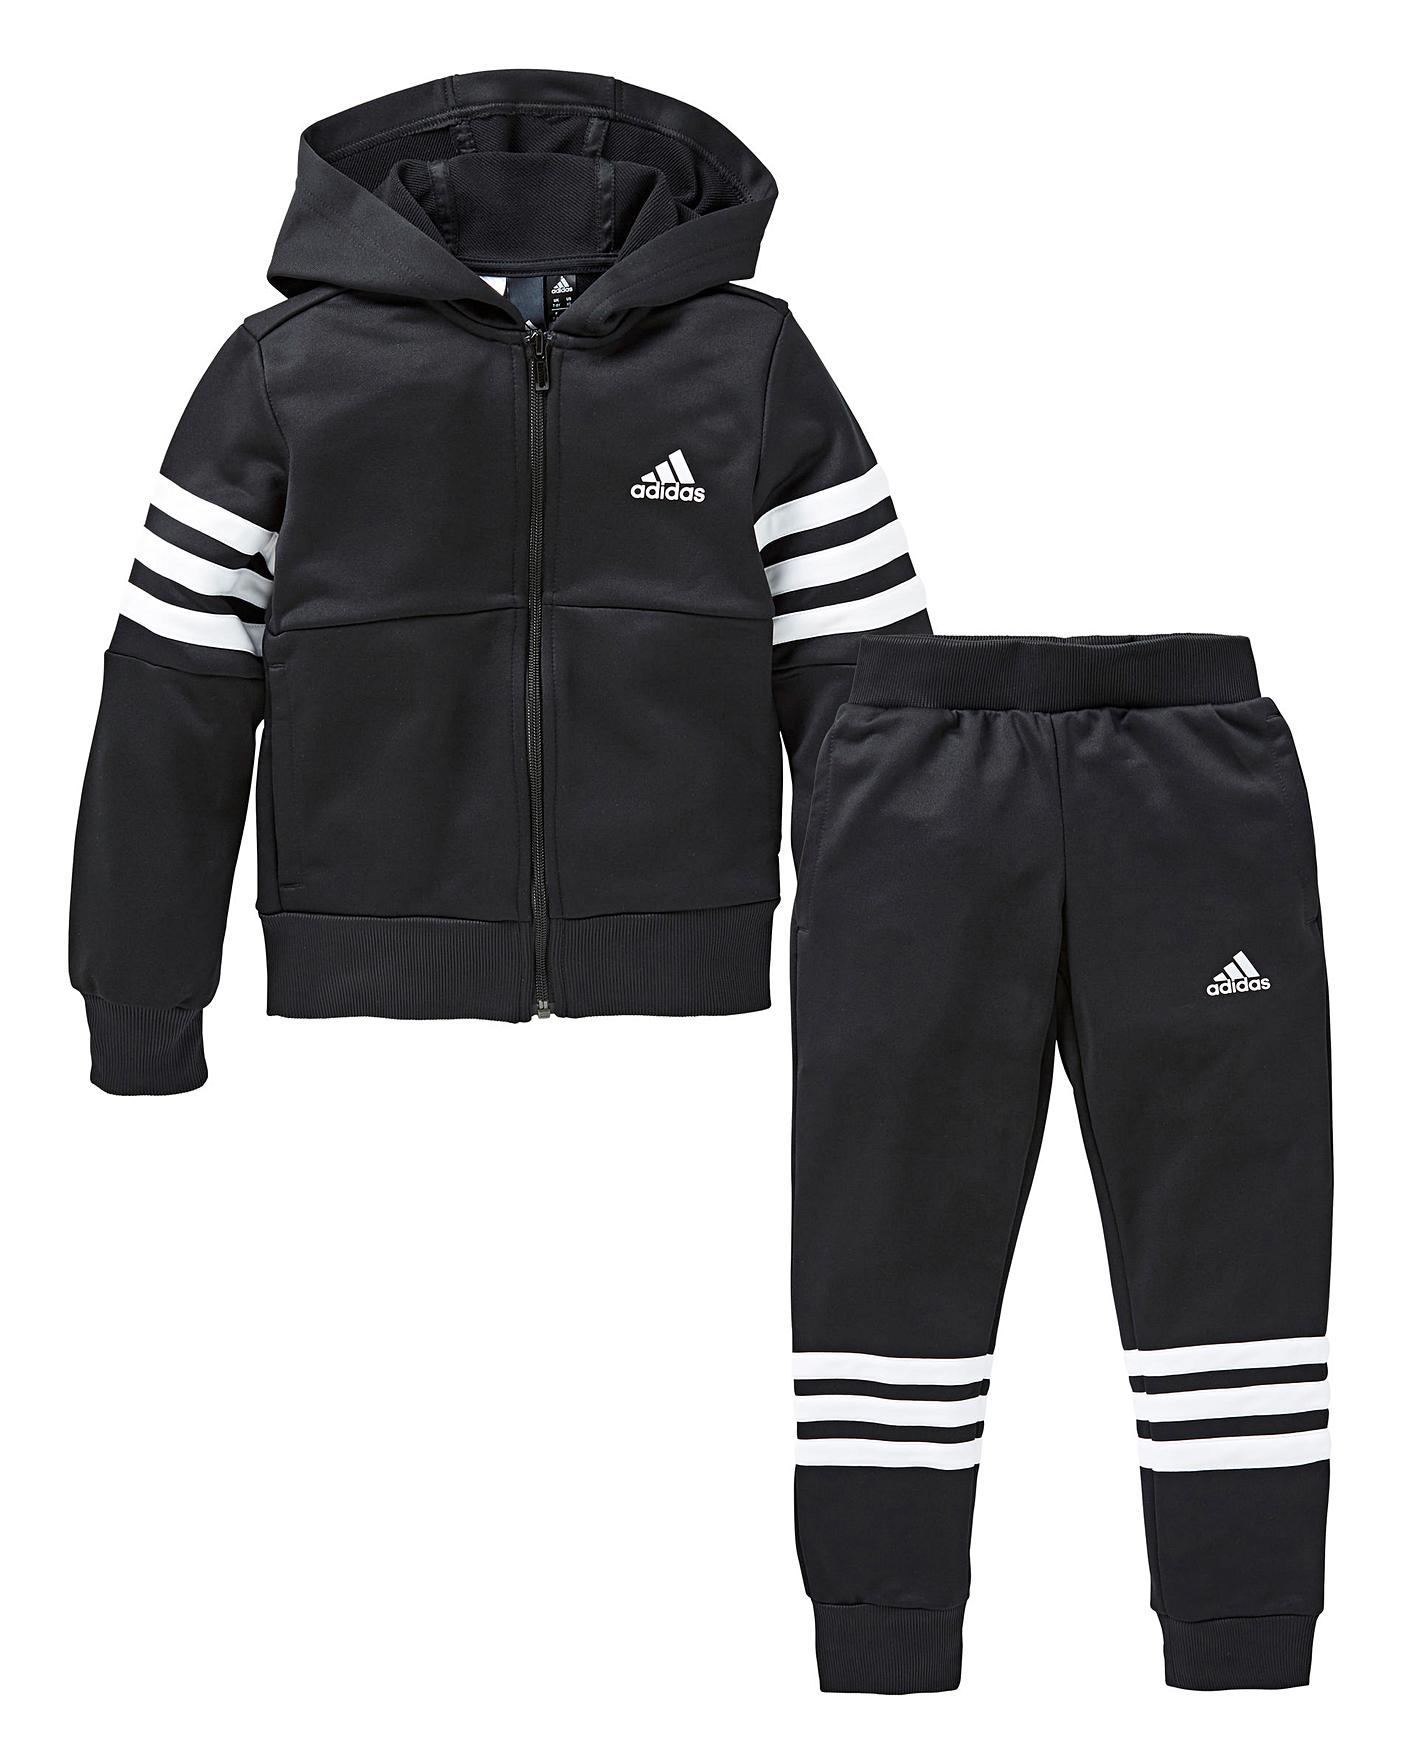 adidas youth track suit